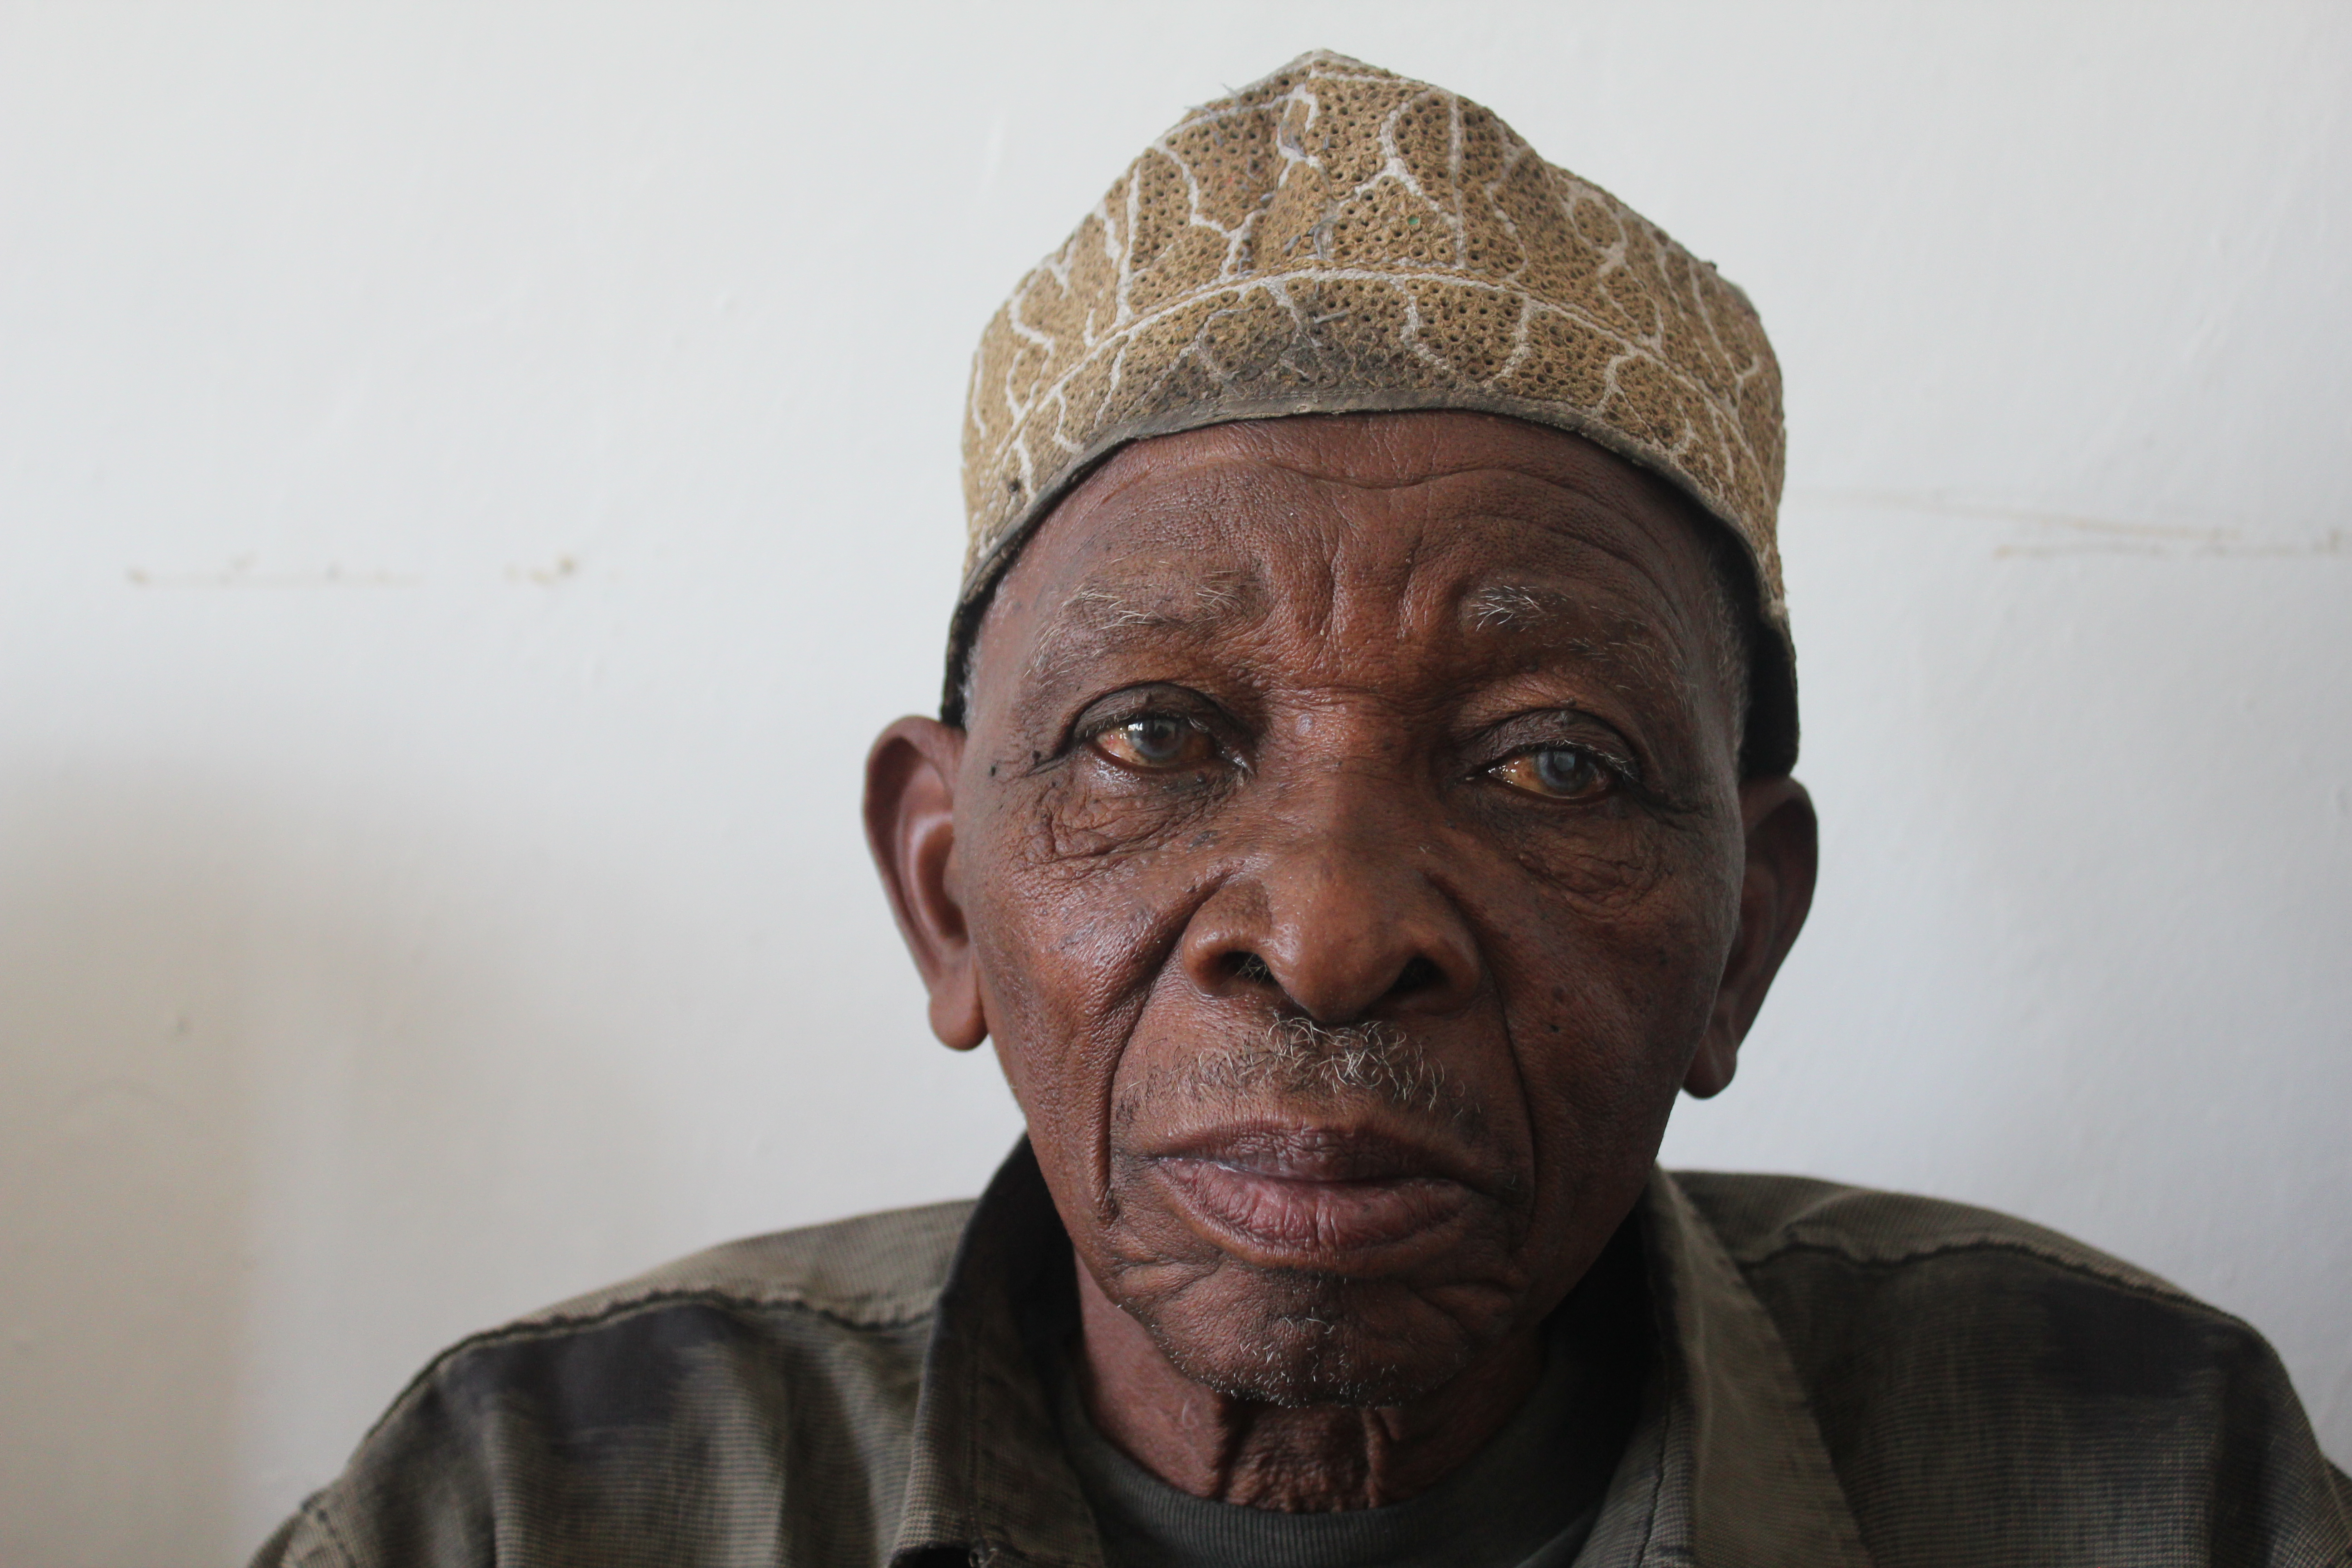 Haji is completely dependent on other people due to cataracts.